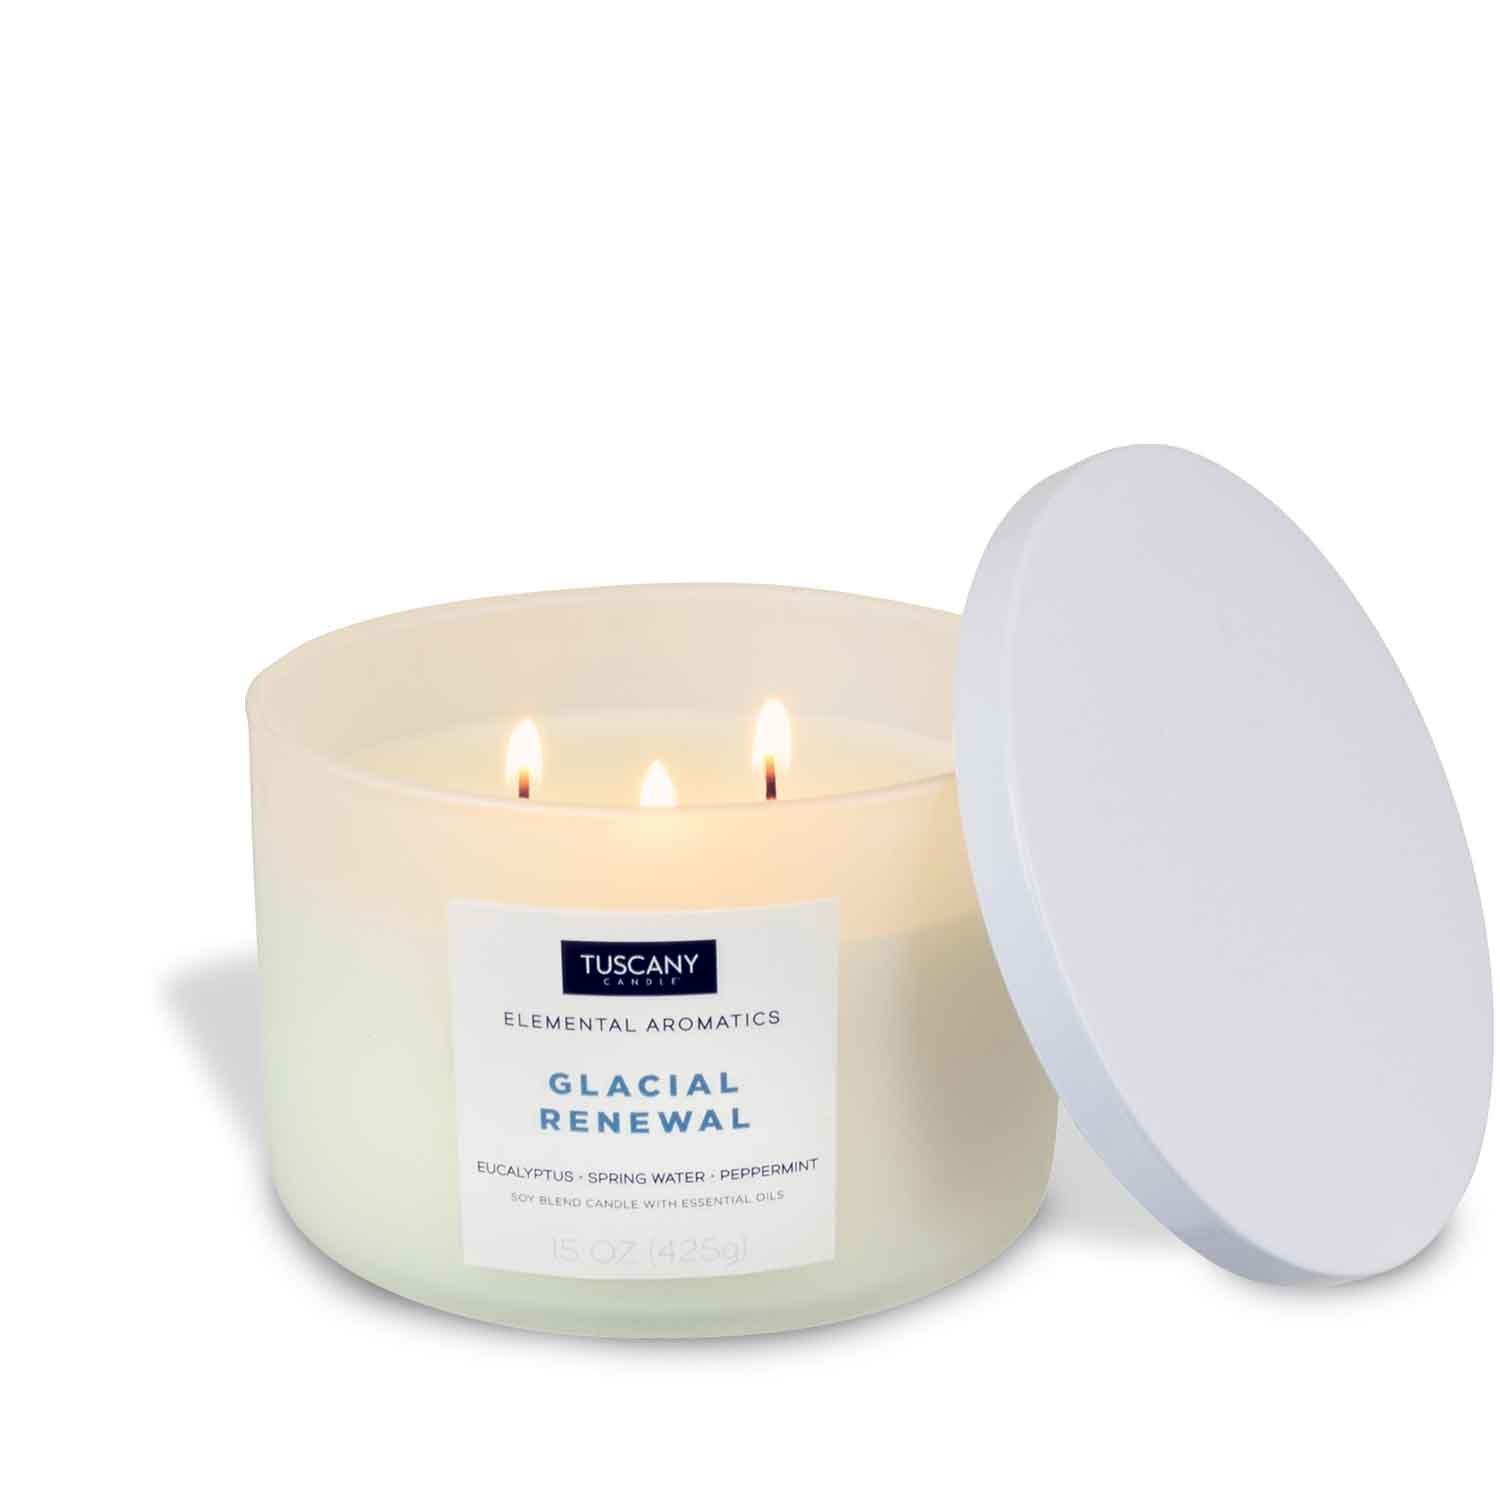 A Glacial Renewal scented candle with a white lid on a refreshing white background by Tuscany Candle.